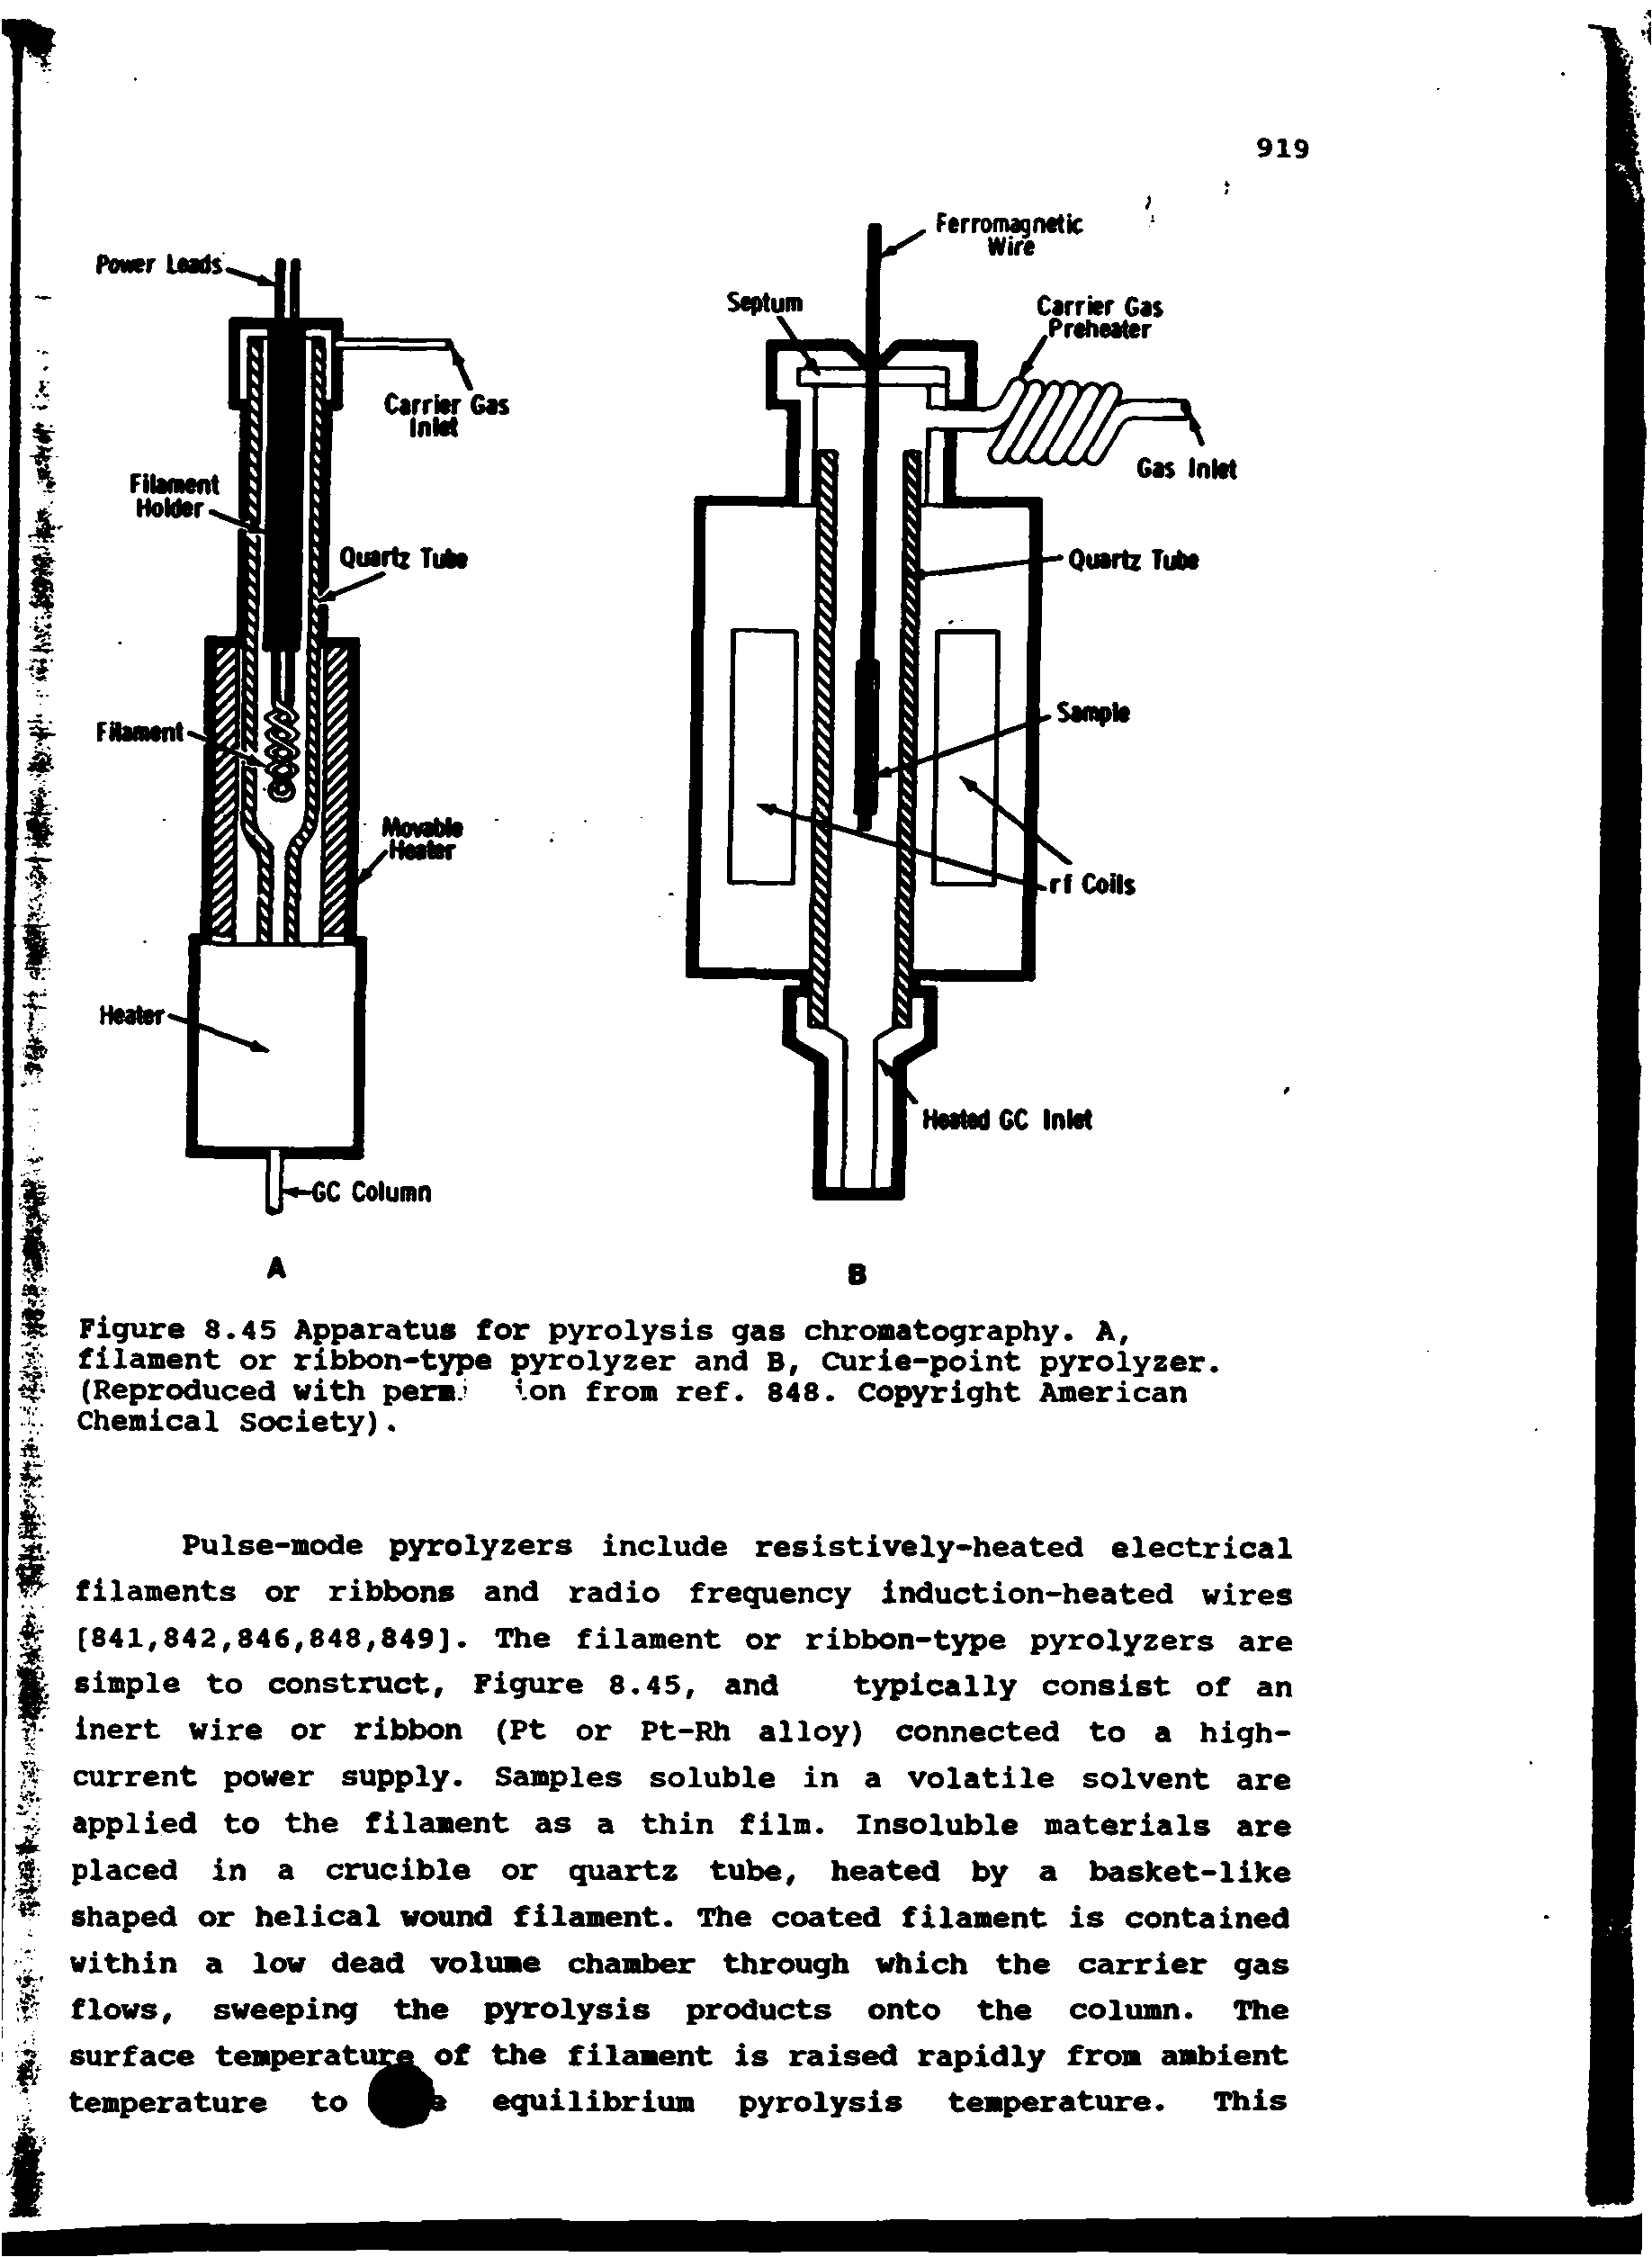 Figure 8.45 Apparatus for pyrolysis gas chromatography. A, filament or ribbon-type pyrolyzer and B, Curie-point pyrolyzer. (Reproduced with perm.i ion from ref. 848. Copyright American Chemical society).